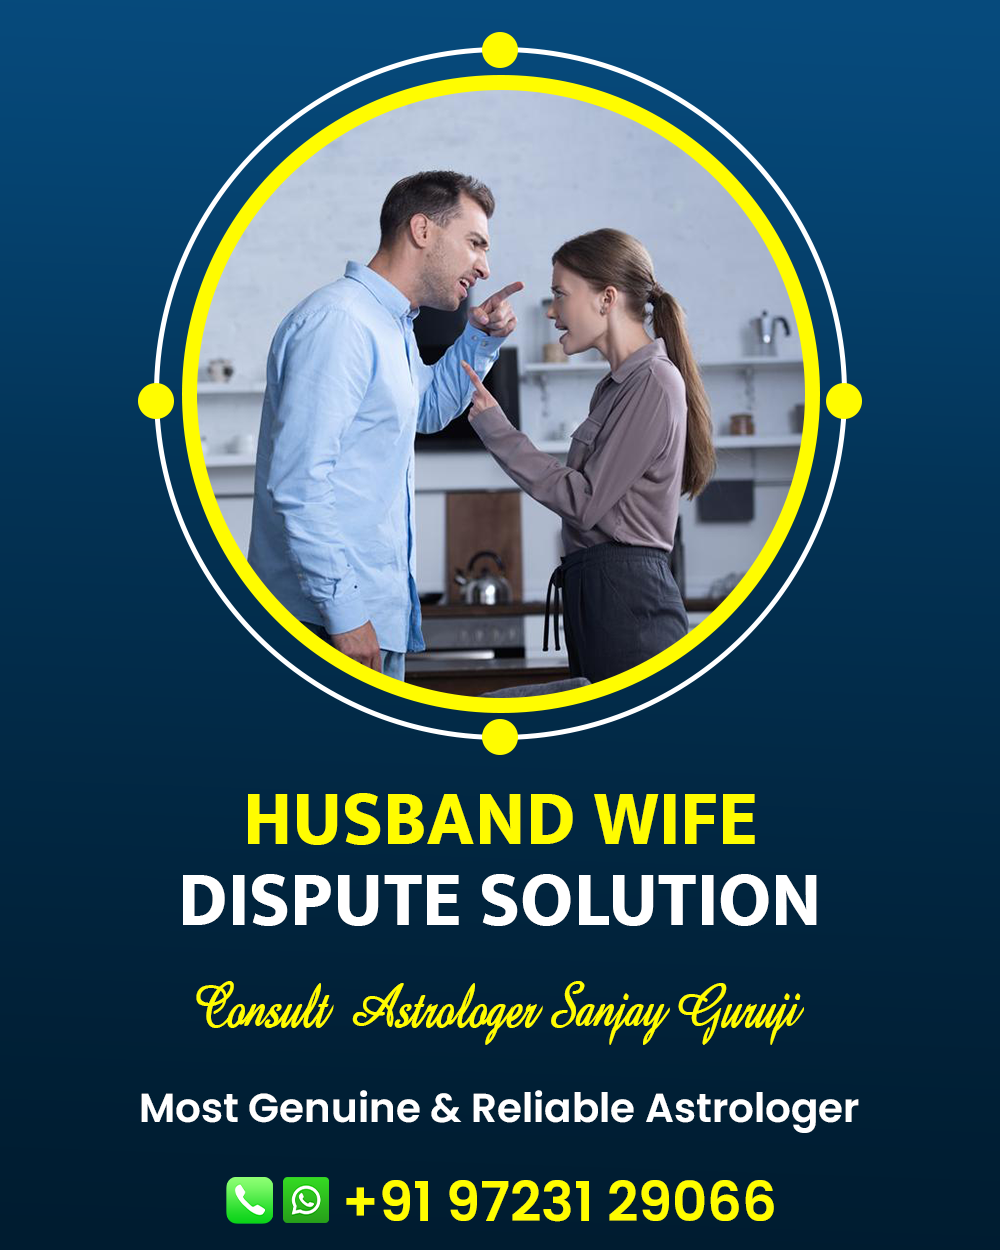 Husband Wife Dispute Problem Solution By Astrology